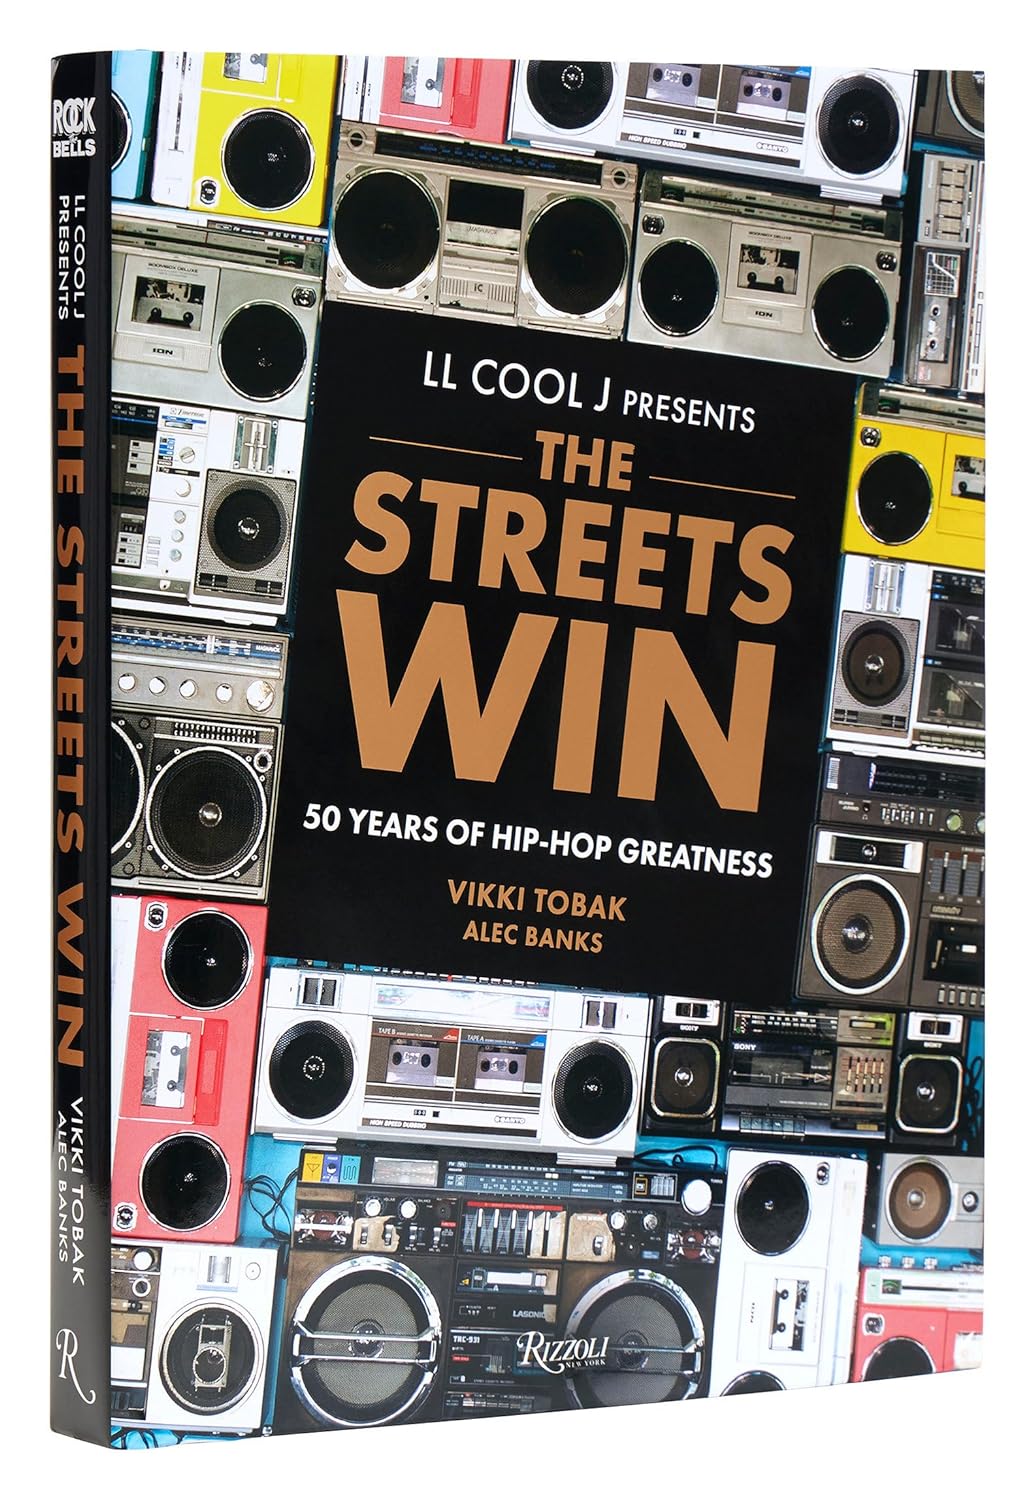 A book cover depicting a wall of boom boxes.